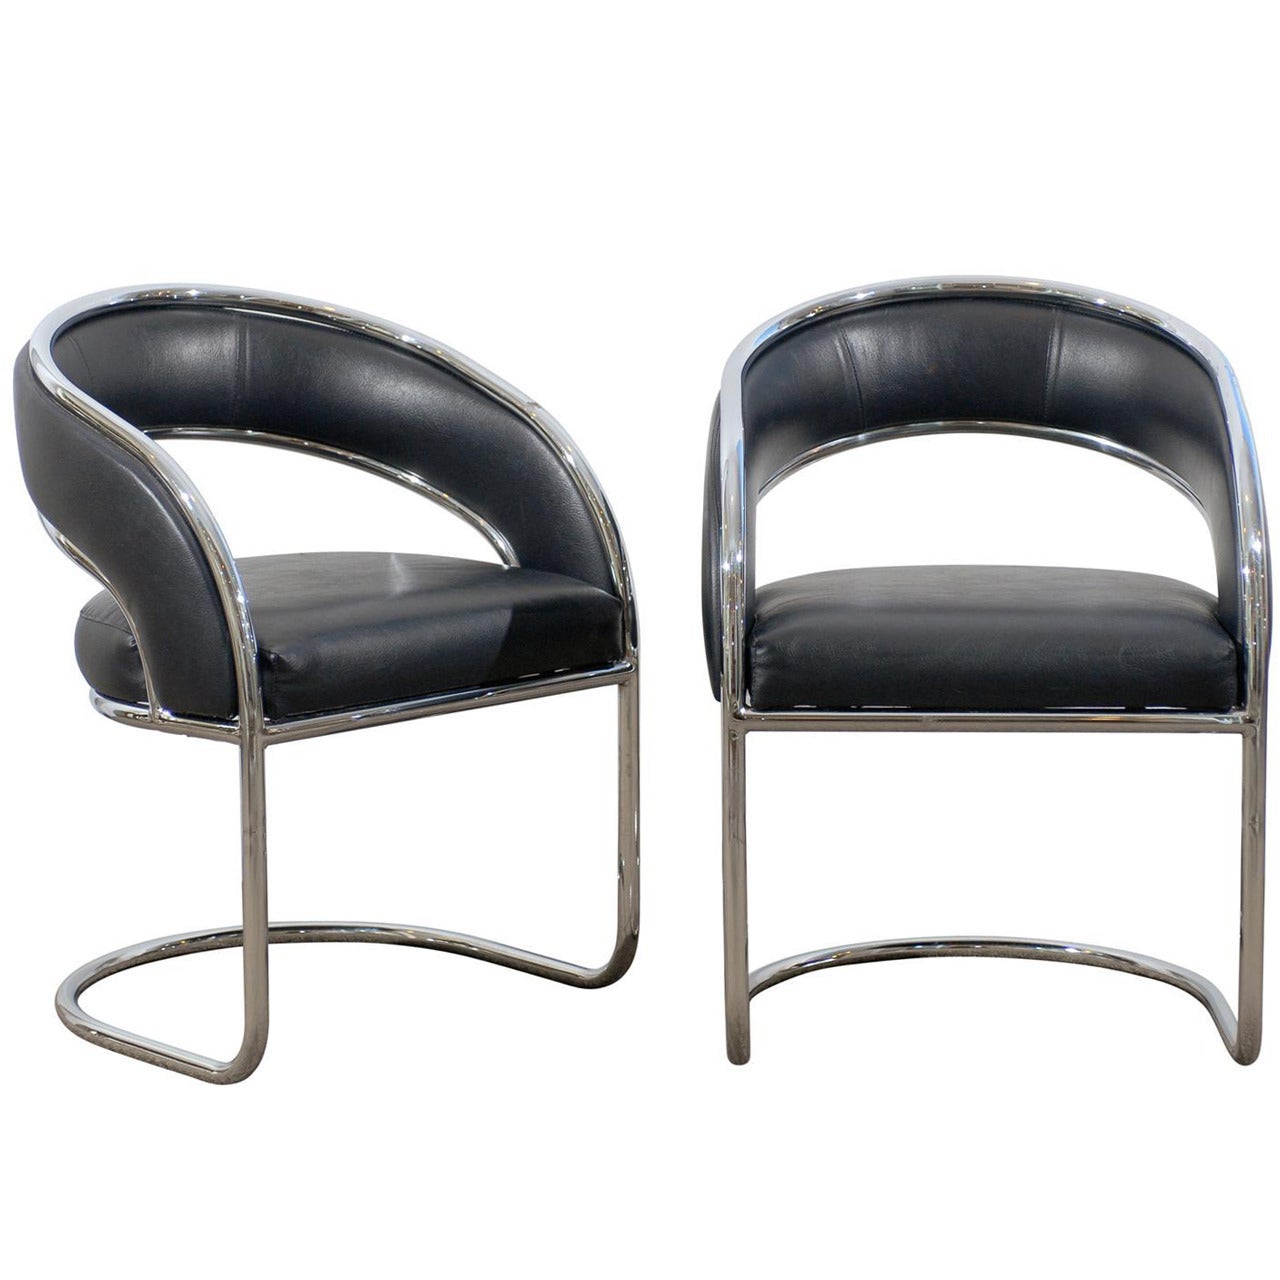 Pair of Rounded Back Chrome Chairs in Black Leather For Sale